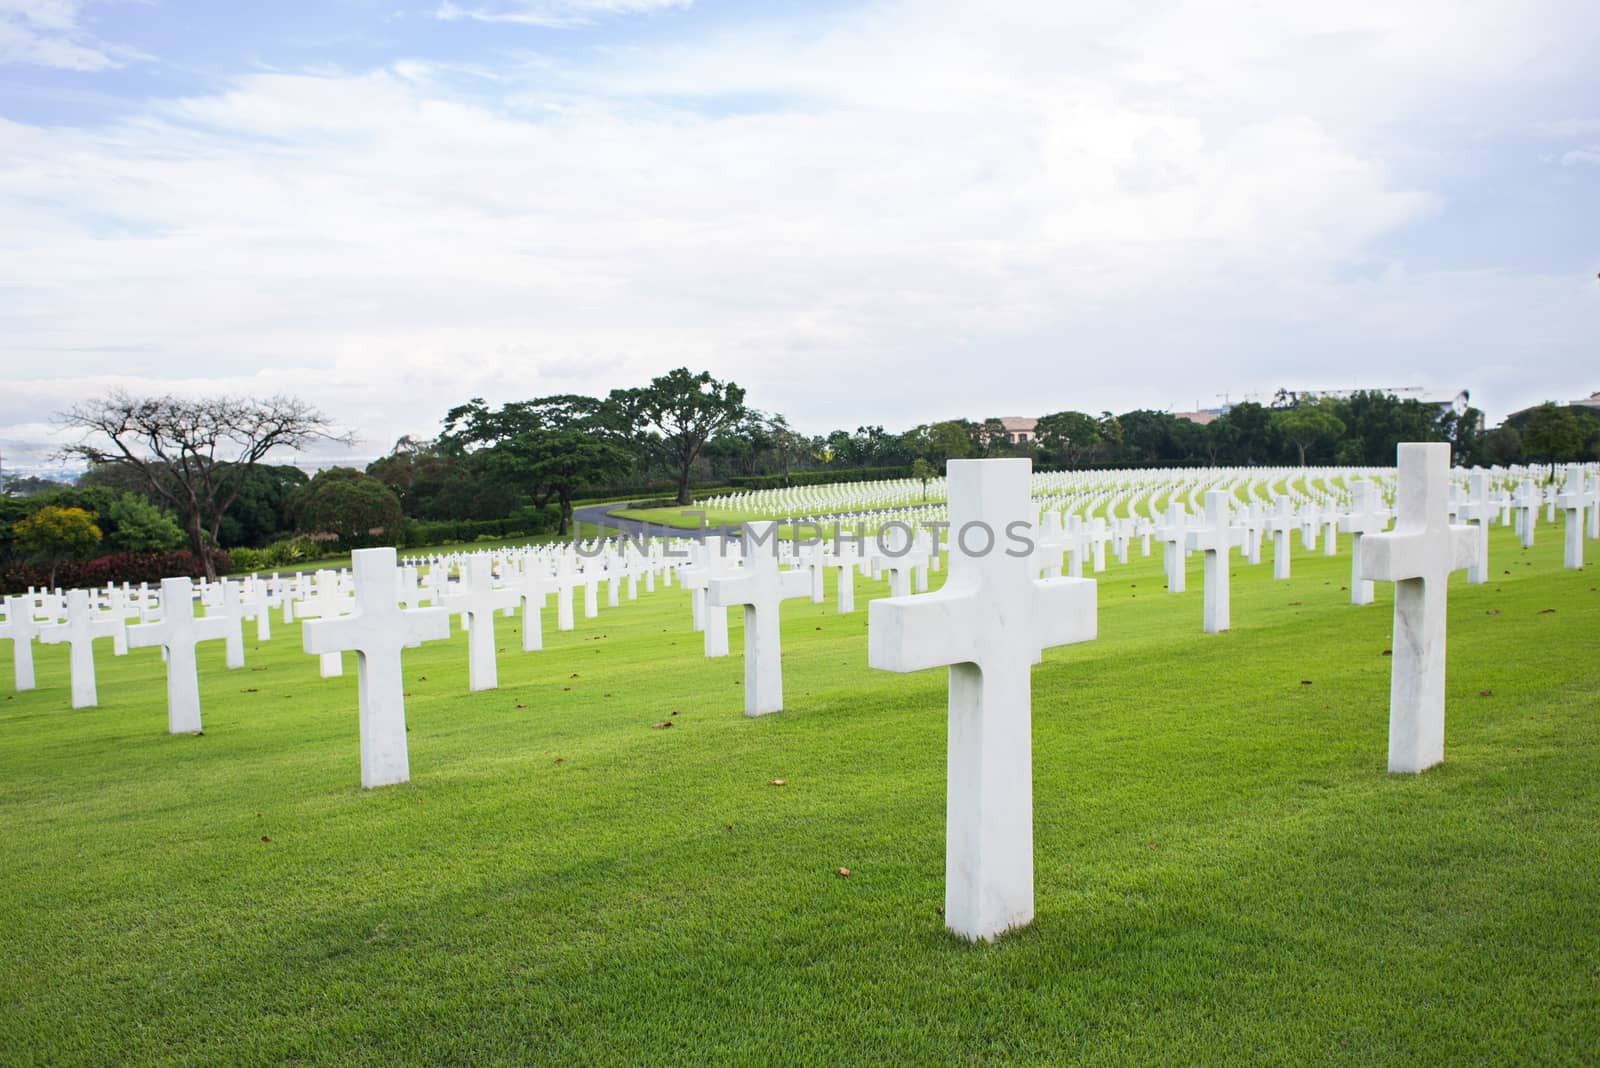 The Manila American Cemetery and Memorial with some of its 17,206 graves. It has the largest number of graves of any cemetery for US personnel killed during The Second World War.